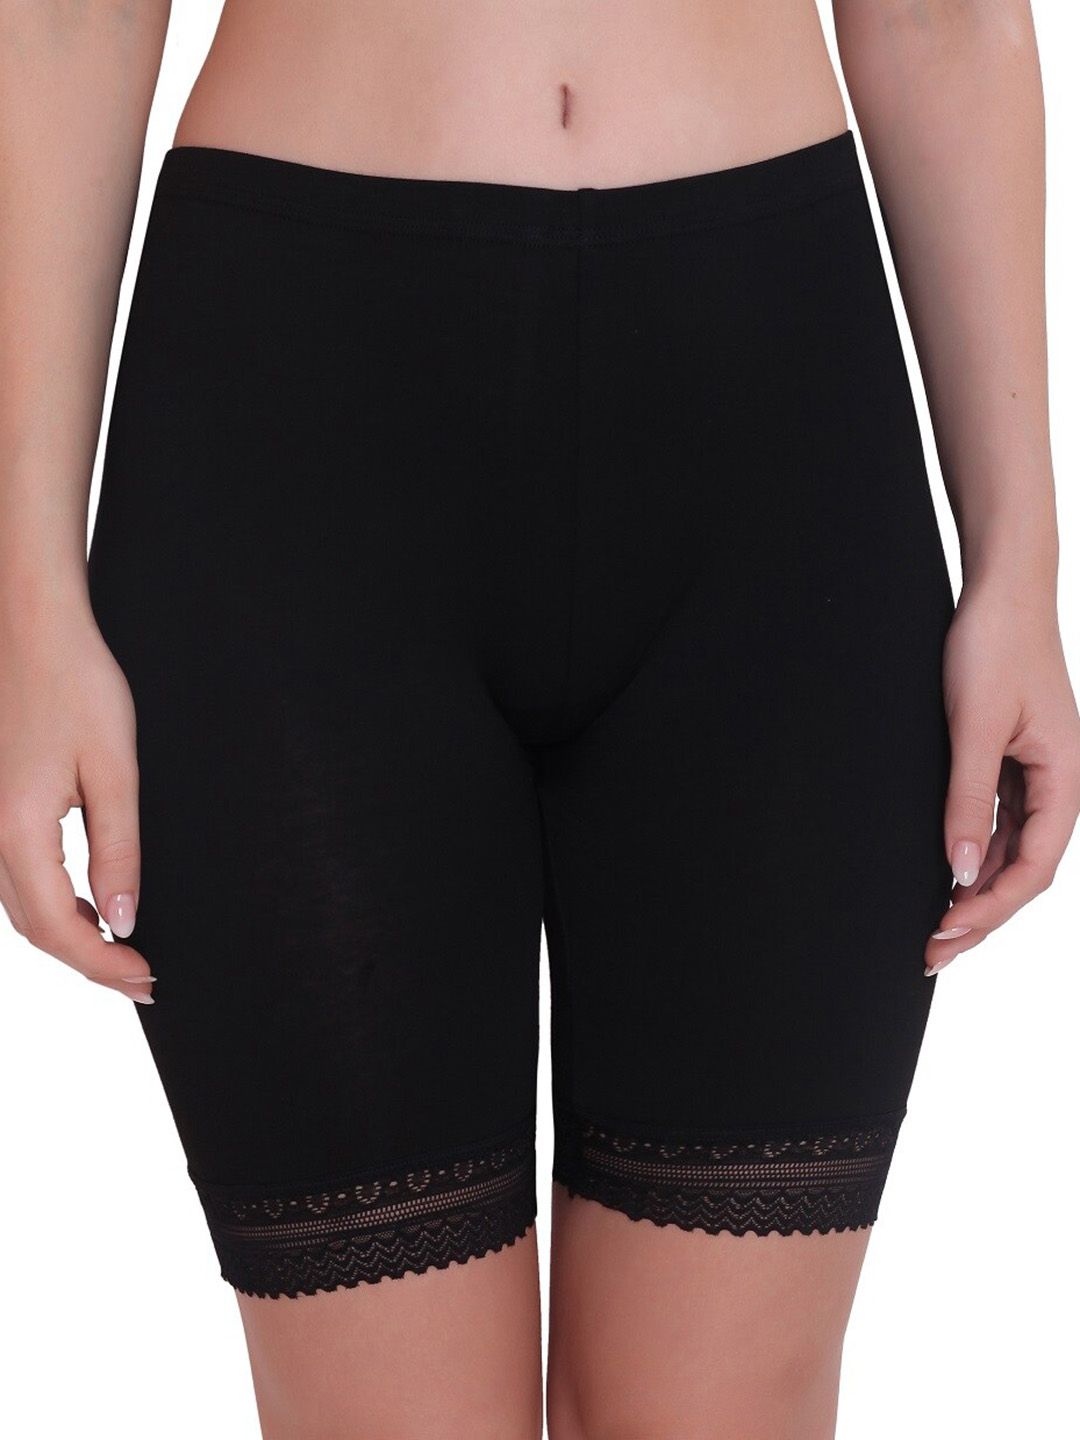 PLUMBURY Women Mid-Rise Under Dress Shorts With Lace Edge Price in India